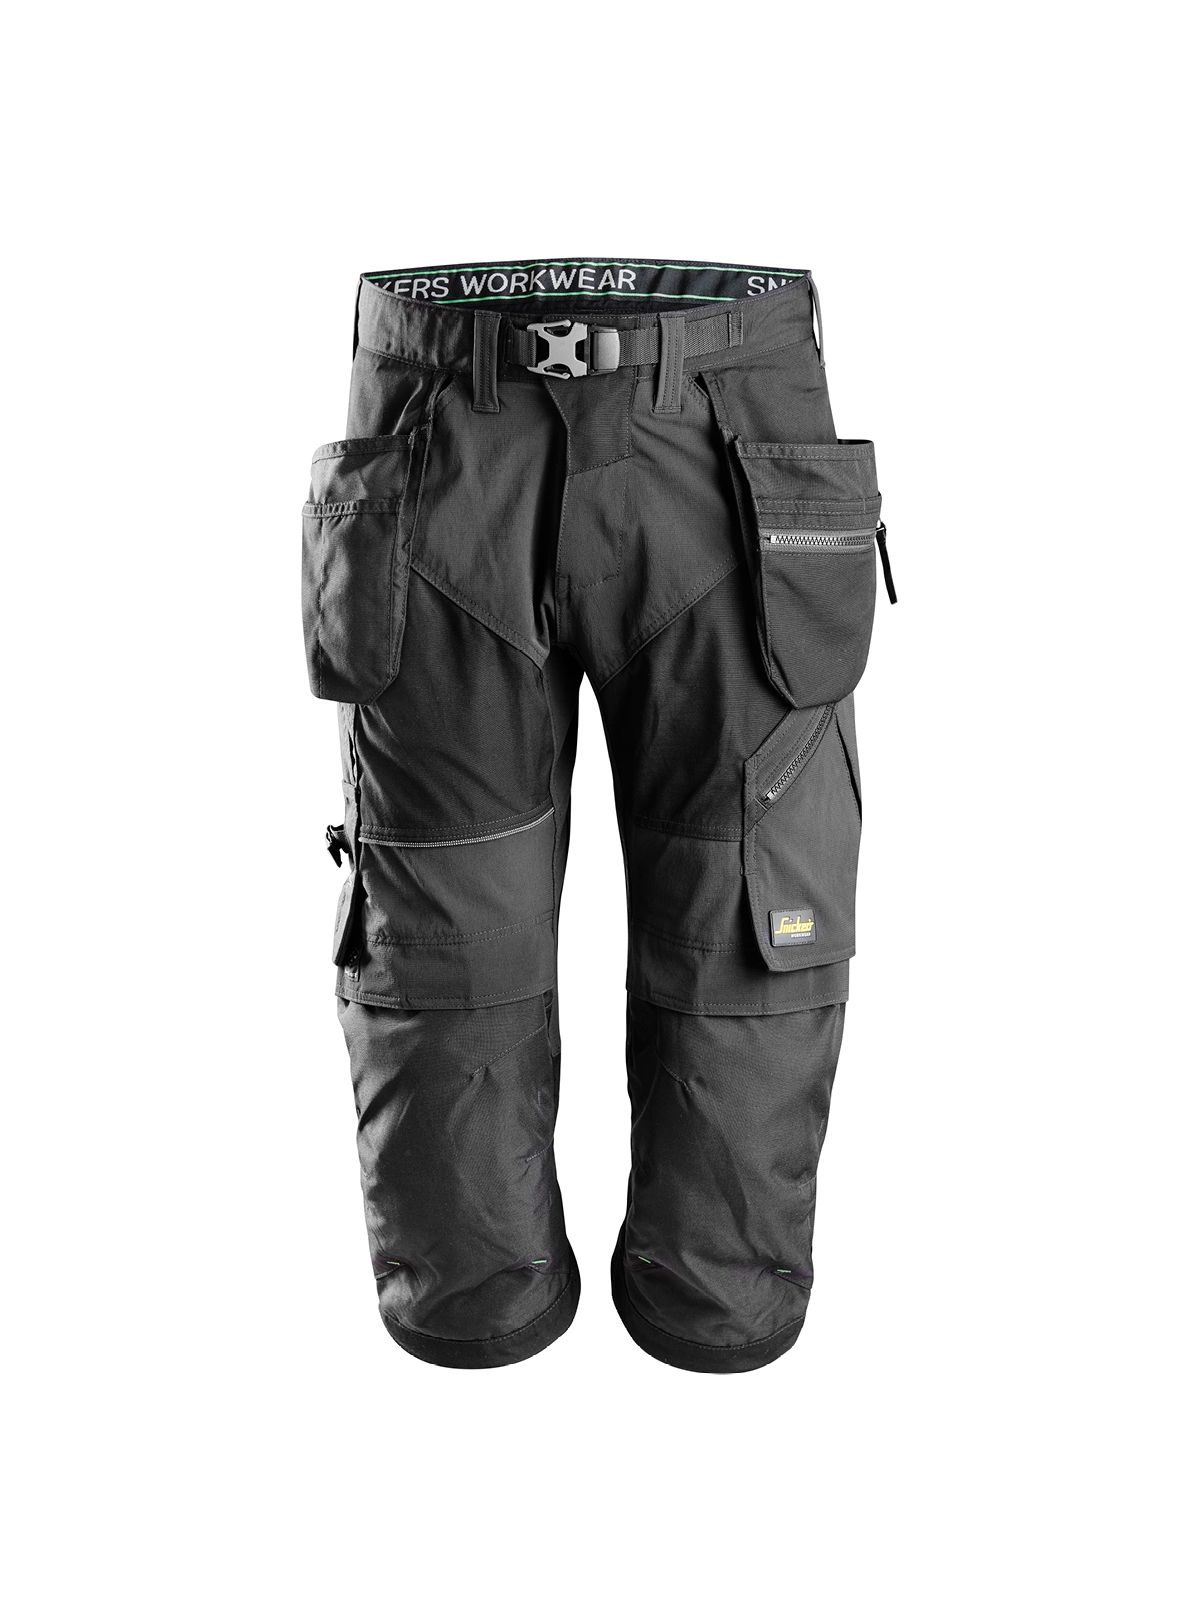 6905 Snickers FlexiWork Work Pirate Shorts with Holster & Kneepad Pockets 